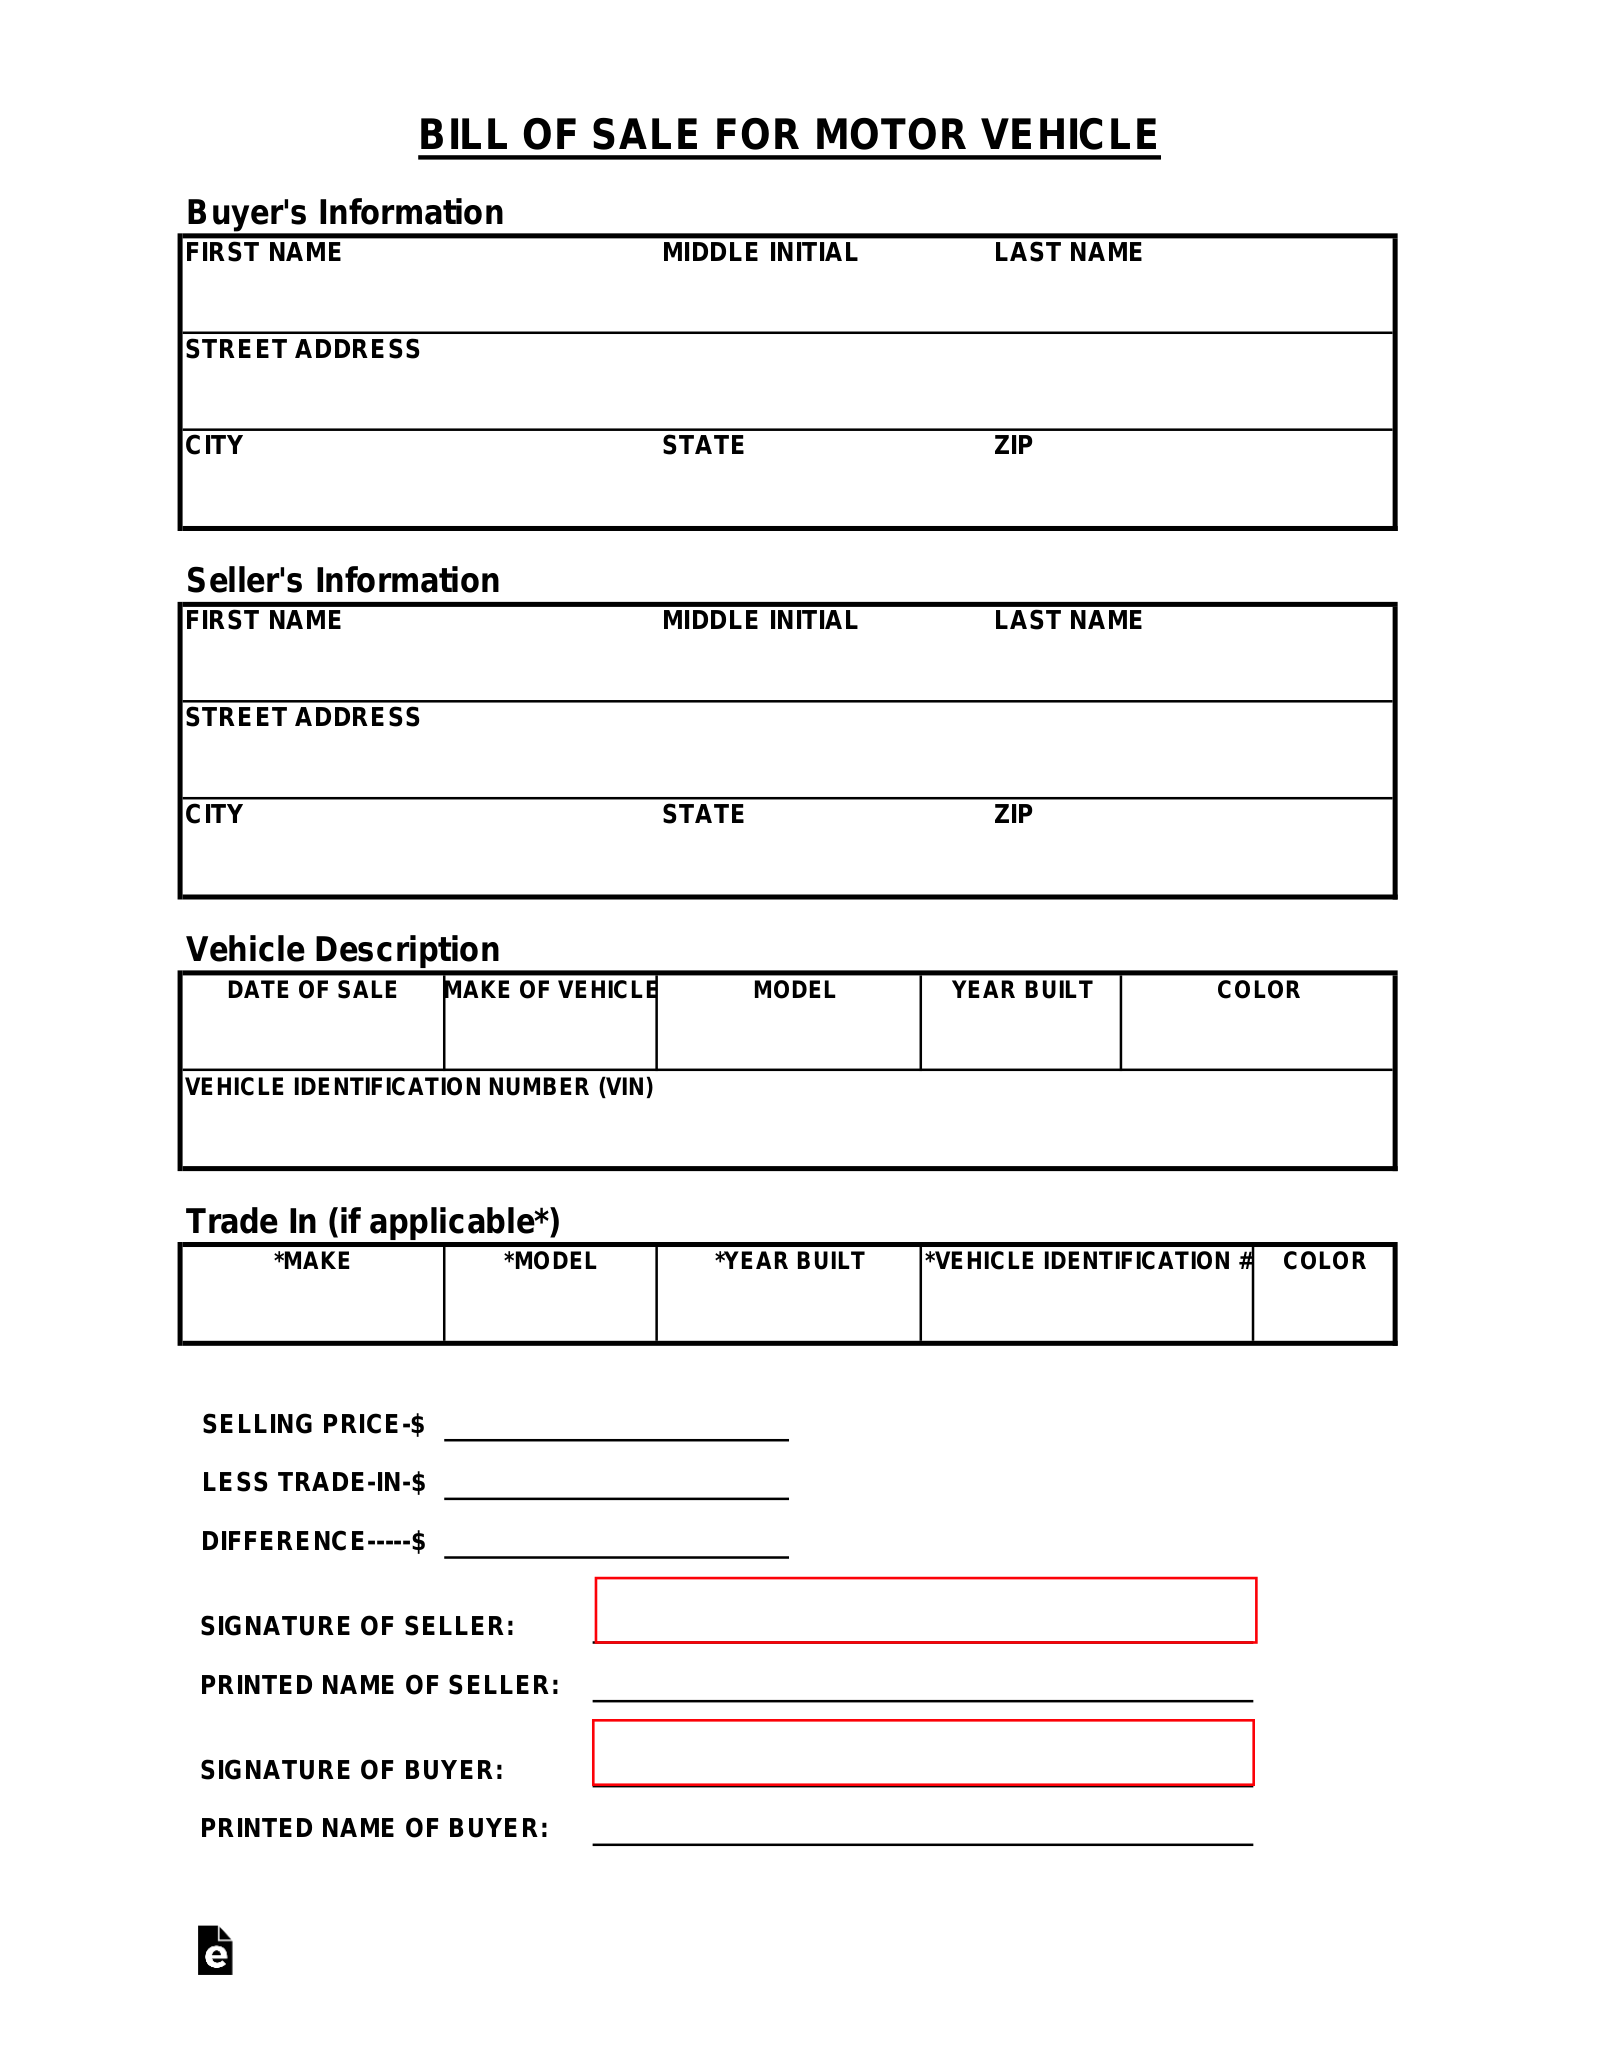 Free Tennessee Motor Vehicle Bill of Sale Form - PDF – eForms